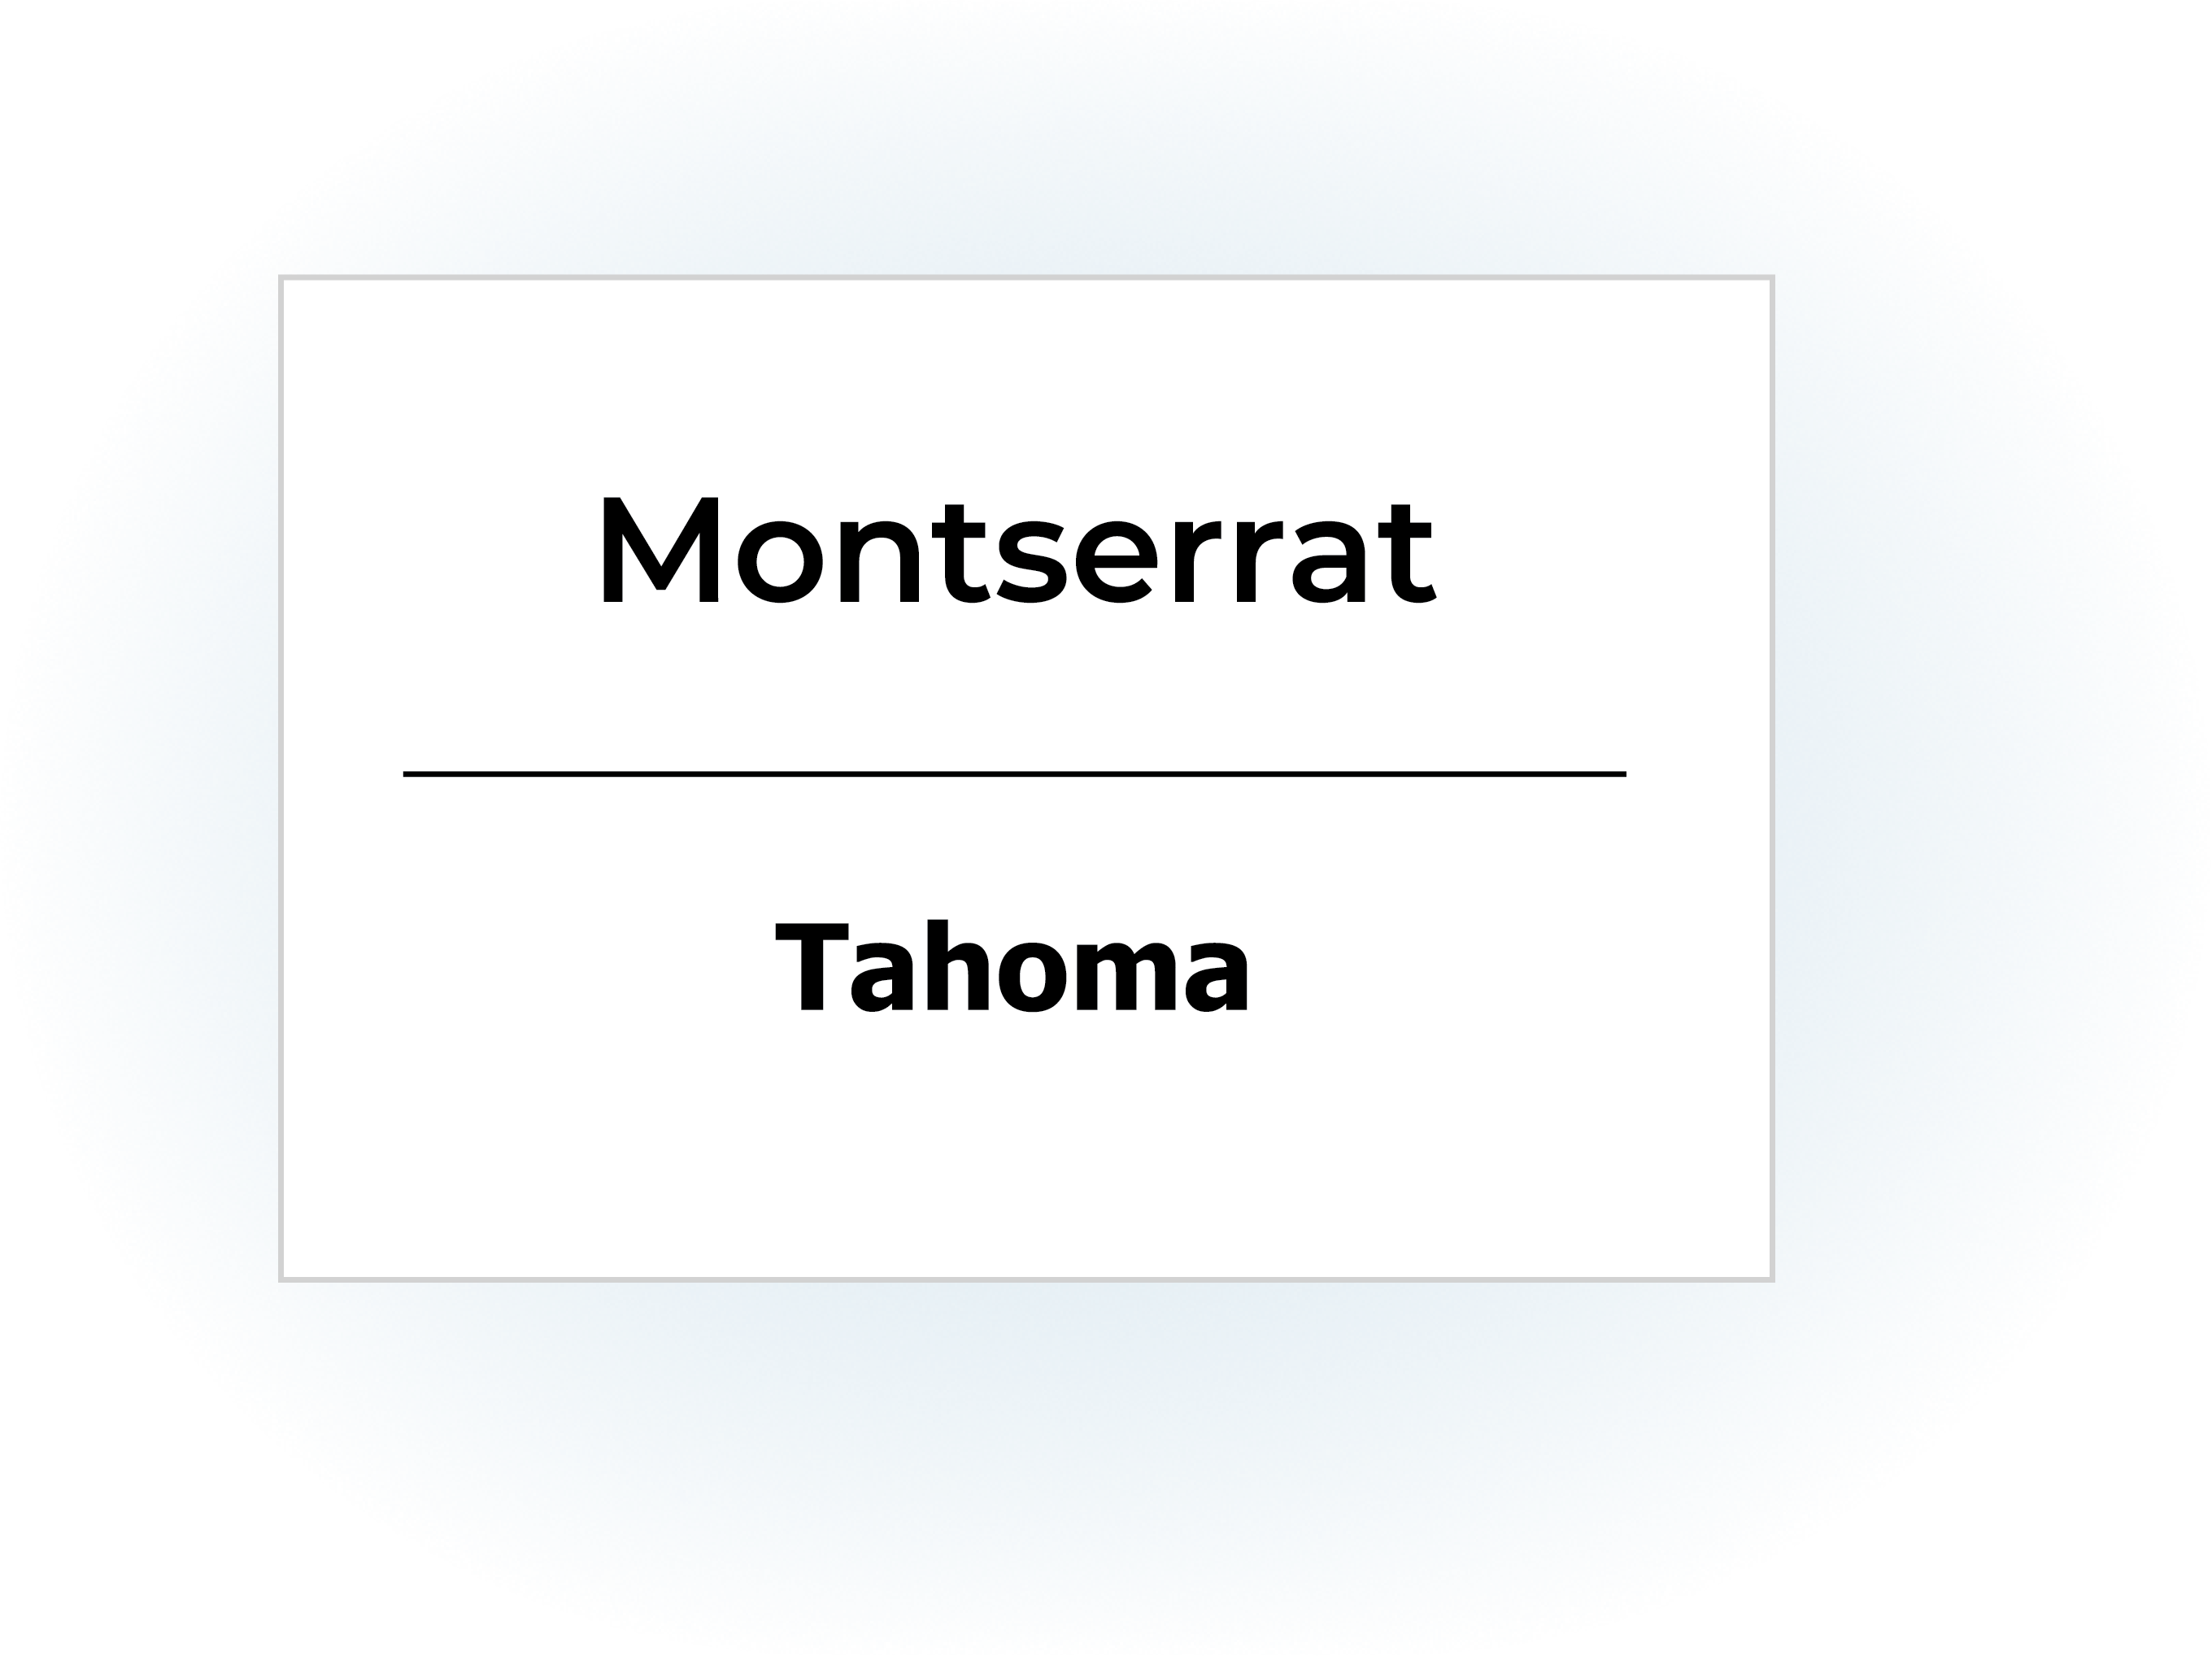 Text in Montserrat and Tahoma